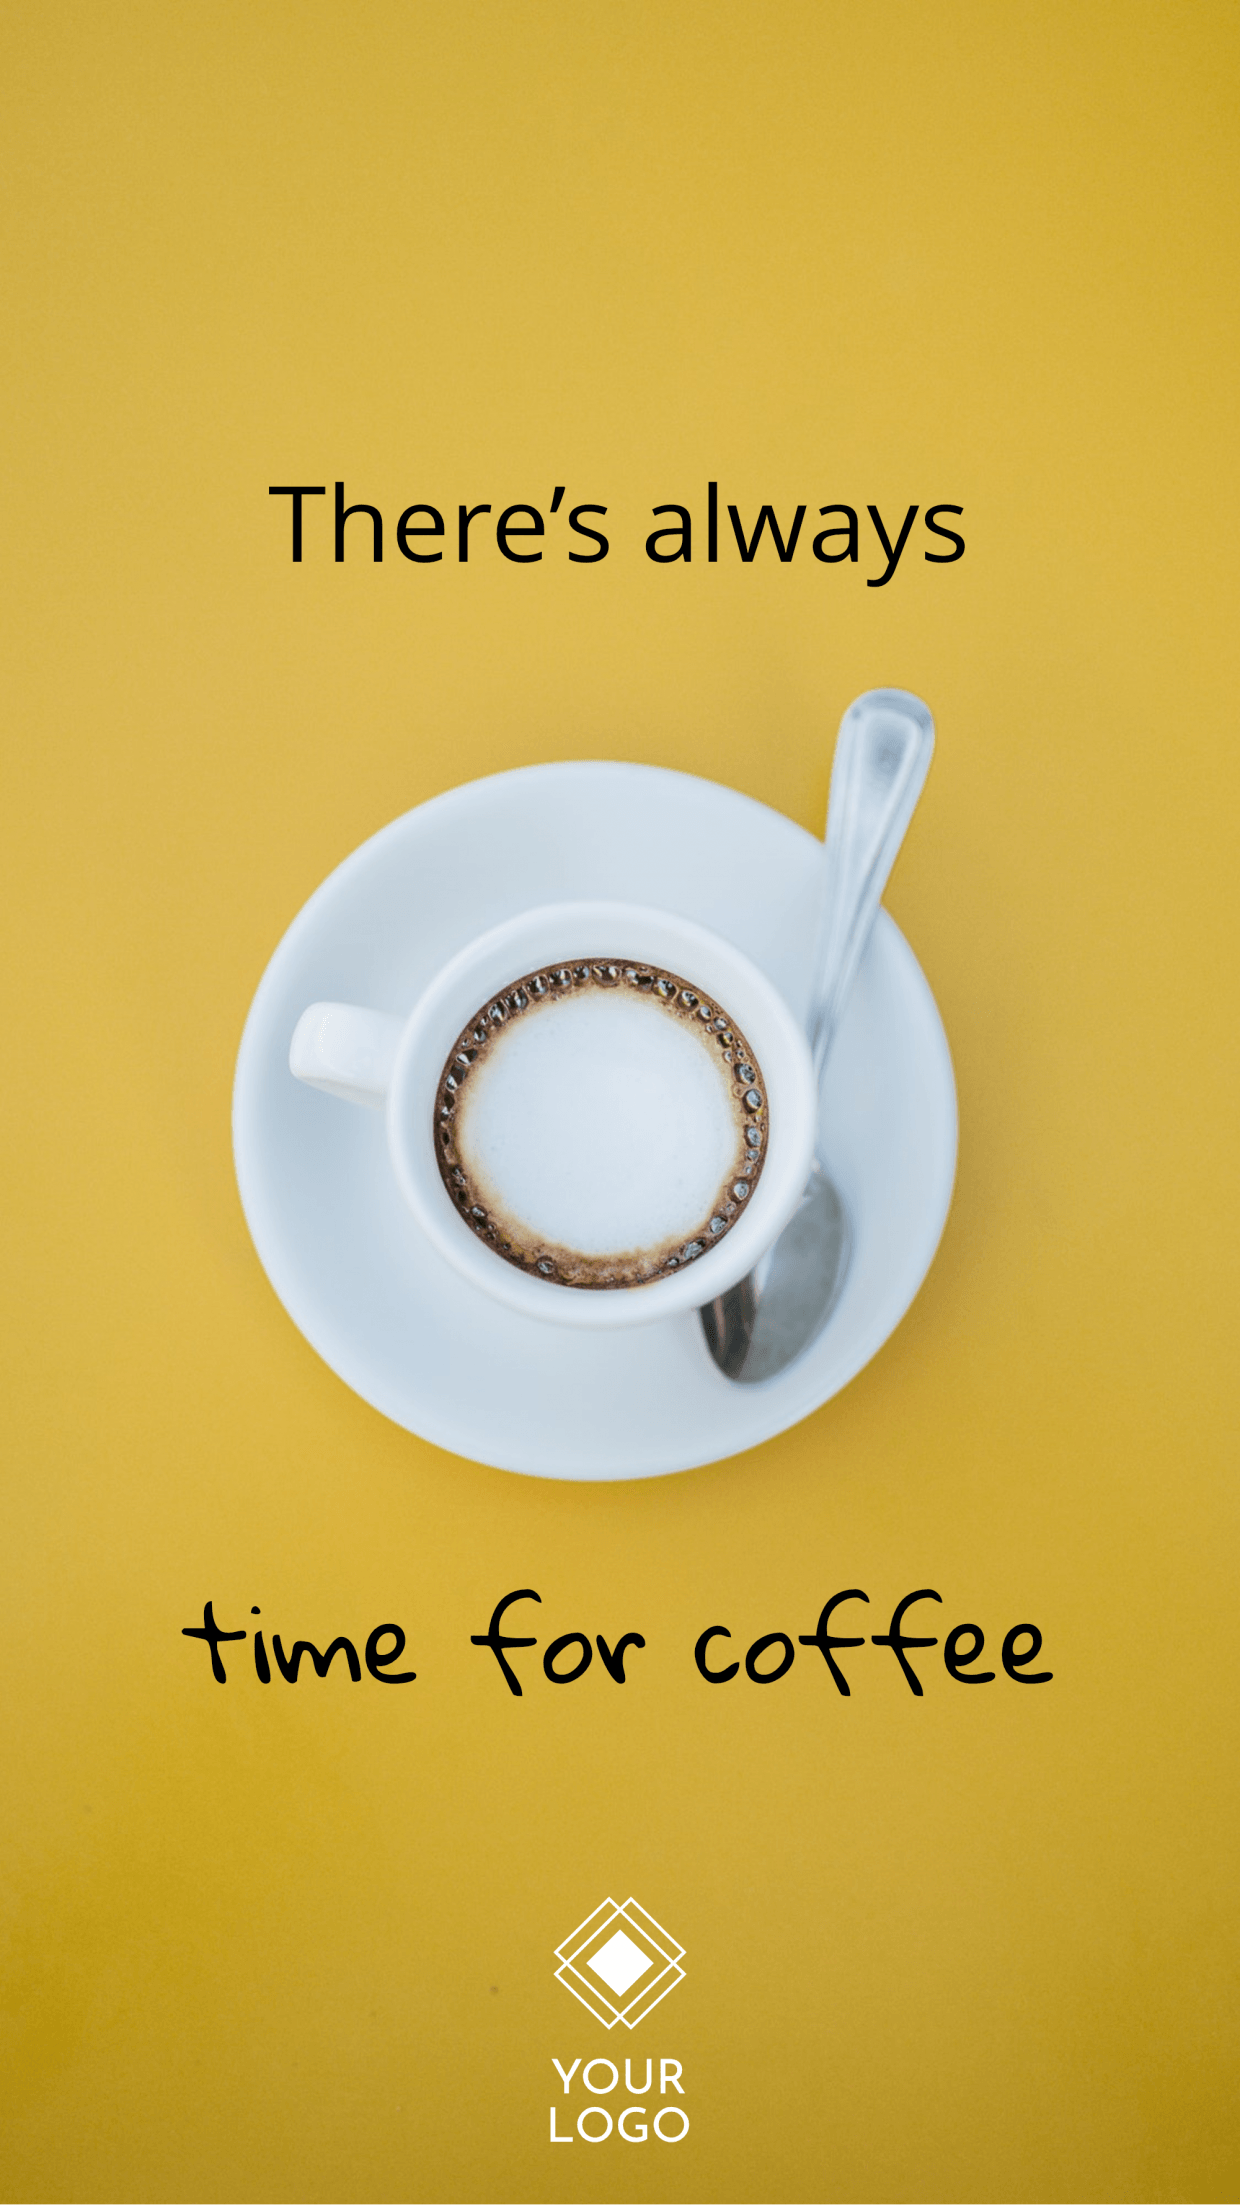 Instagram Time Logo - There's always time for coffee YOUR LOGO Instagram Story Template